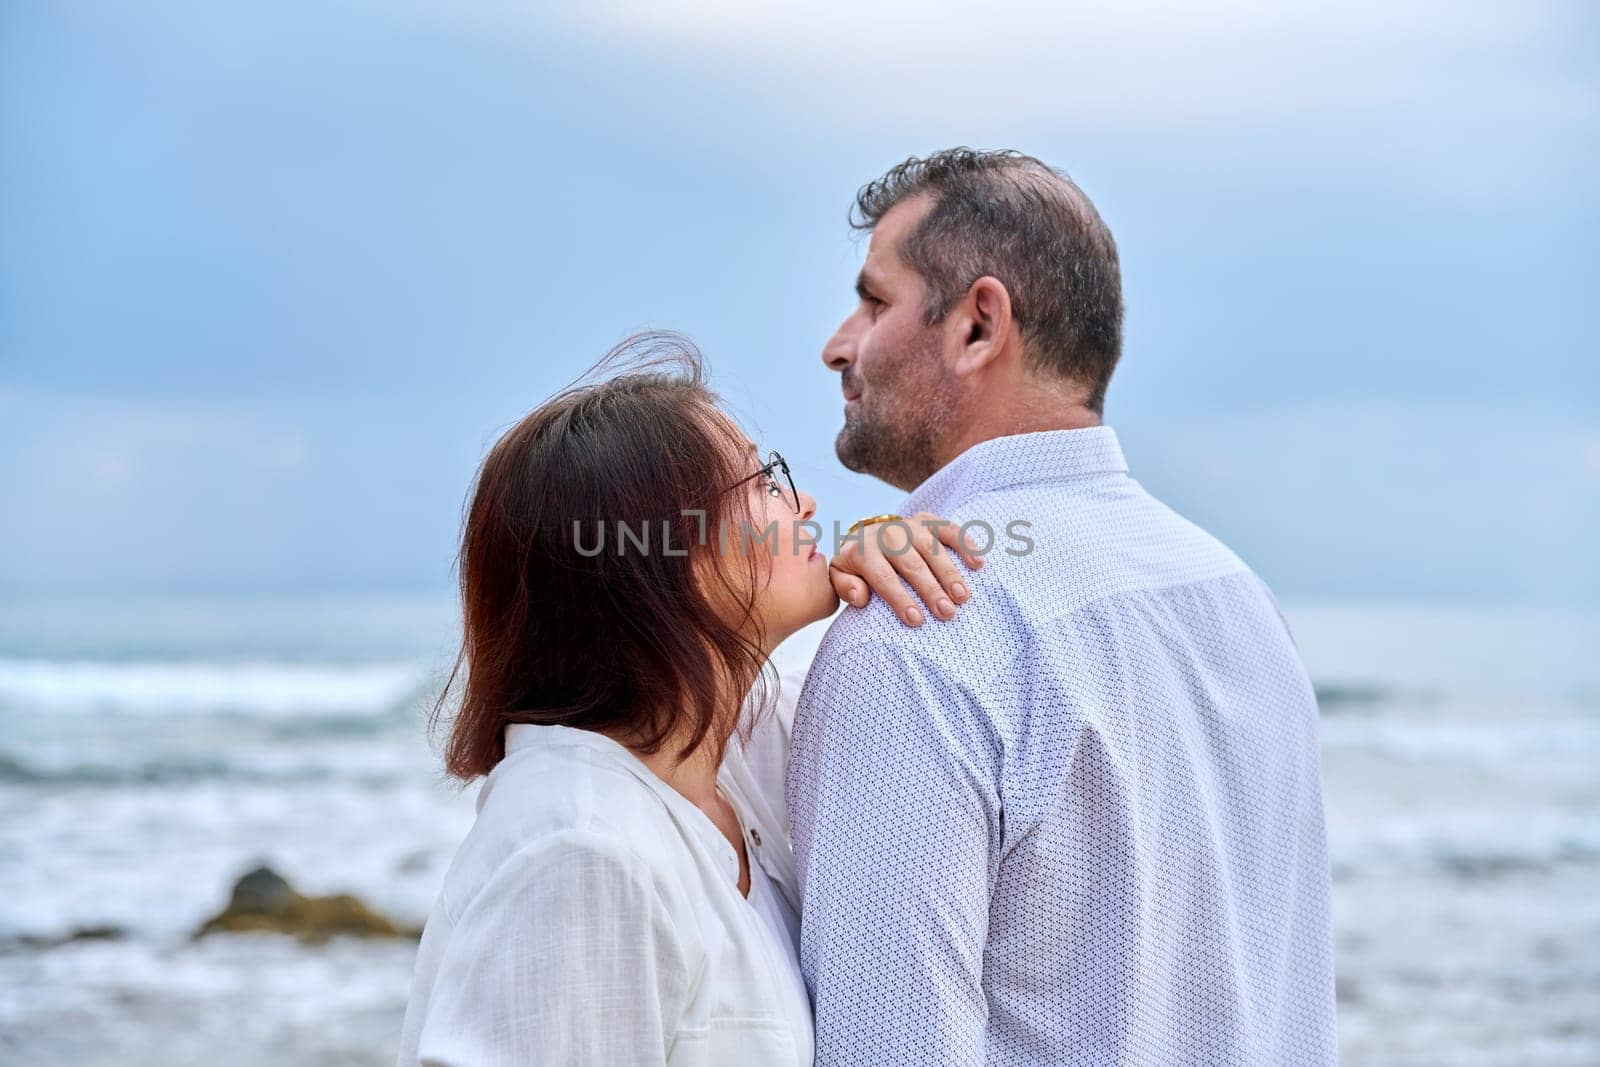 Outdoor portrait of mature couple embracing against the background of sea nature. Middle-aged happy romantic man and woman. Relationships, feelings, lifestyle, marriage, people concept